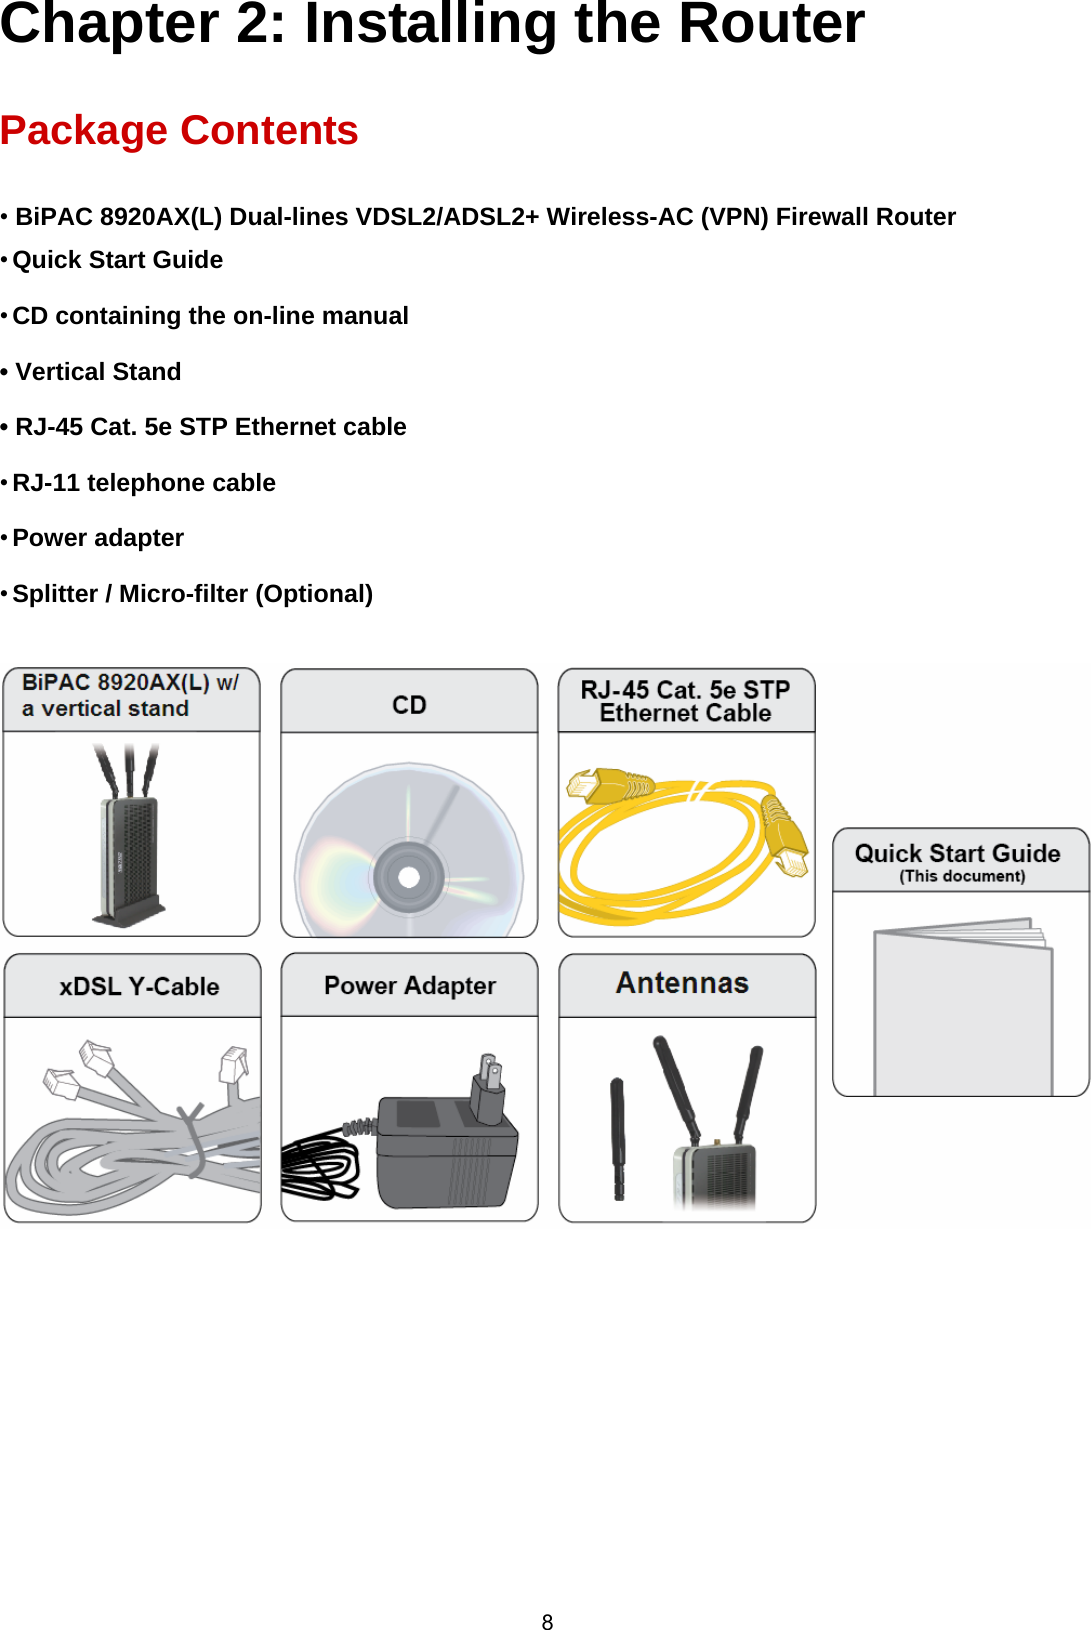  8 Chapter 2: Installing the Router  Package Contents  • BiPAC 8920AX(L) Dual-lines VDSL2/ADSL2+ Wireless-AC (VPN) Firewall Router • Quick Start Guide • CD containing the on-line manual • Vertical Stand • RJ-45 Cat. 5e STP Ethernet cable • RJ-11 telephone cable • Power adapter • Splitter / Micro-filter (Optional)         